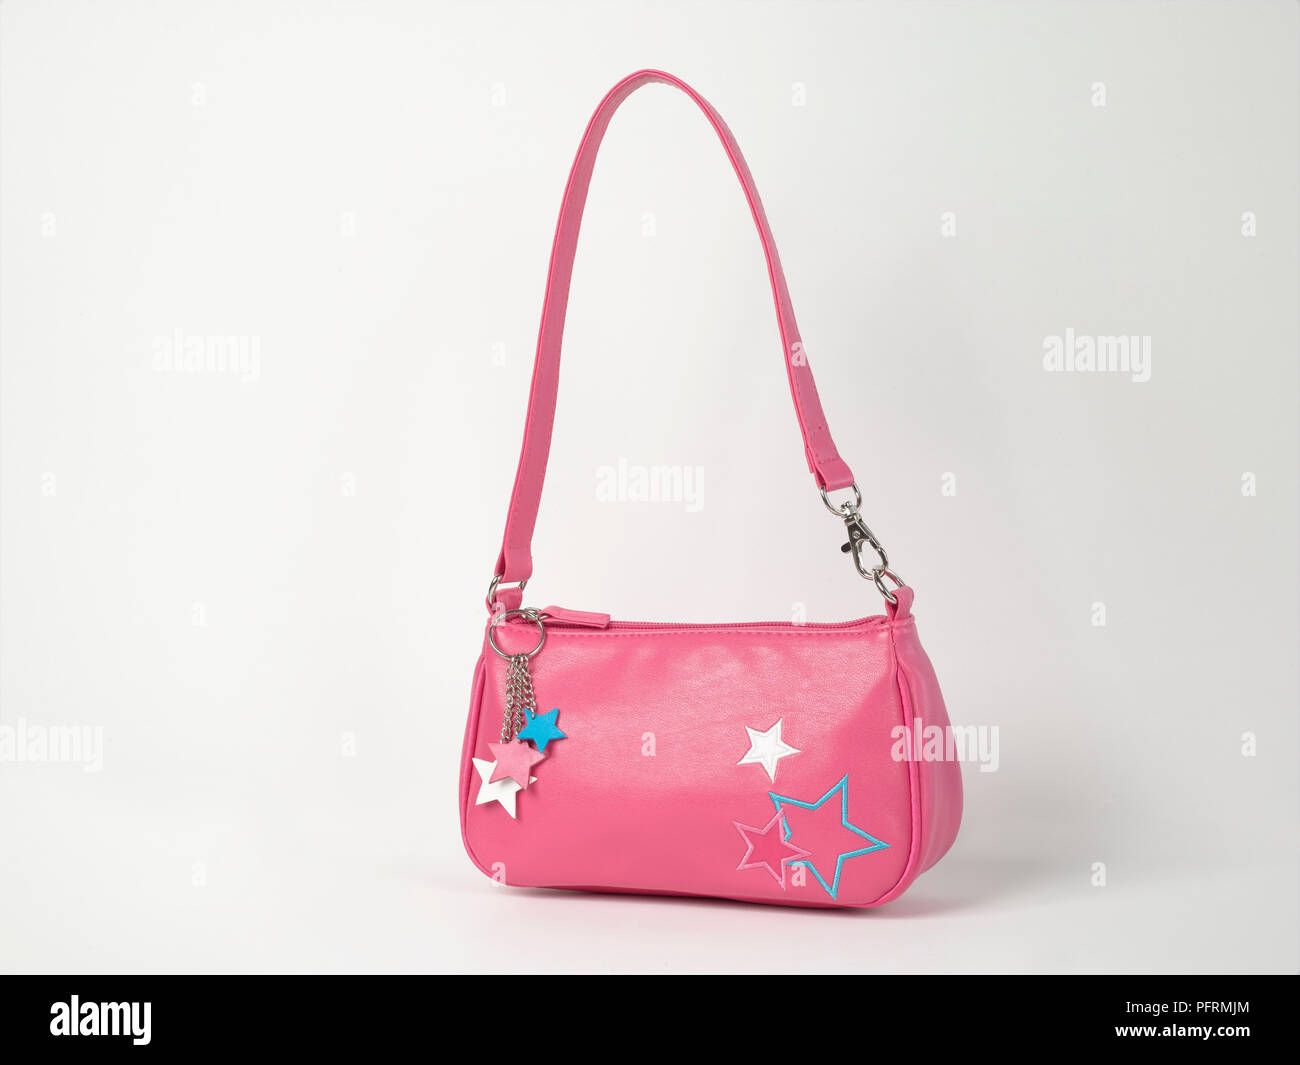 Small pink handbag with embroidered star motif and star key ring on zipper Stock Photo